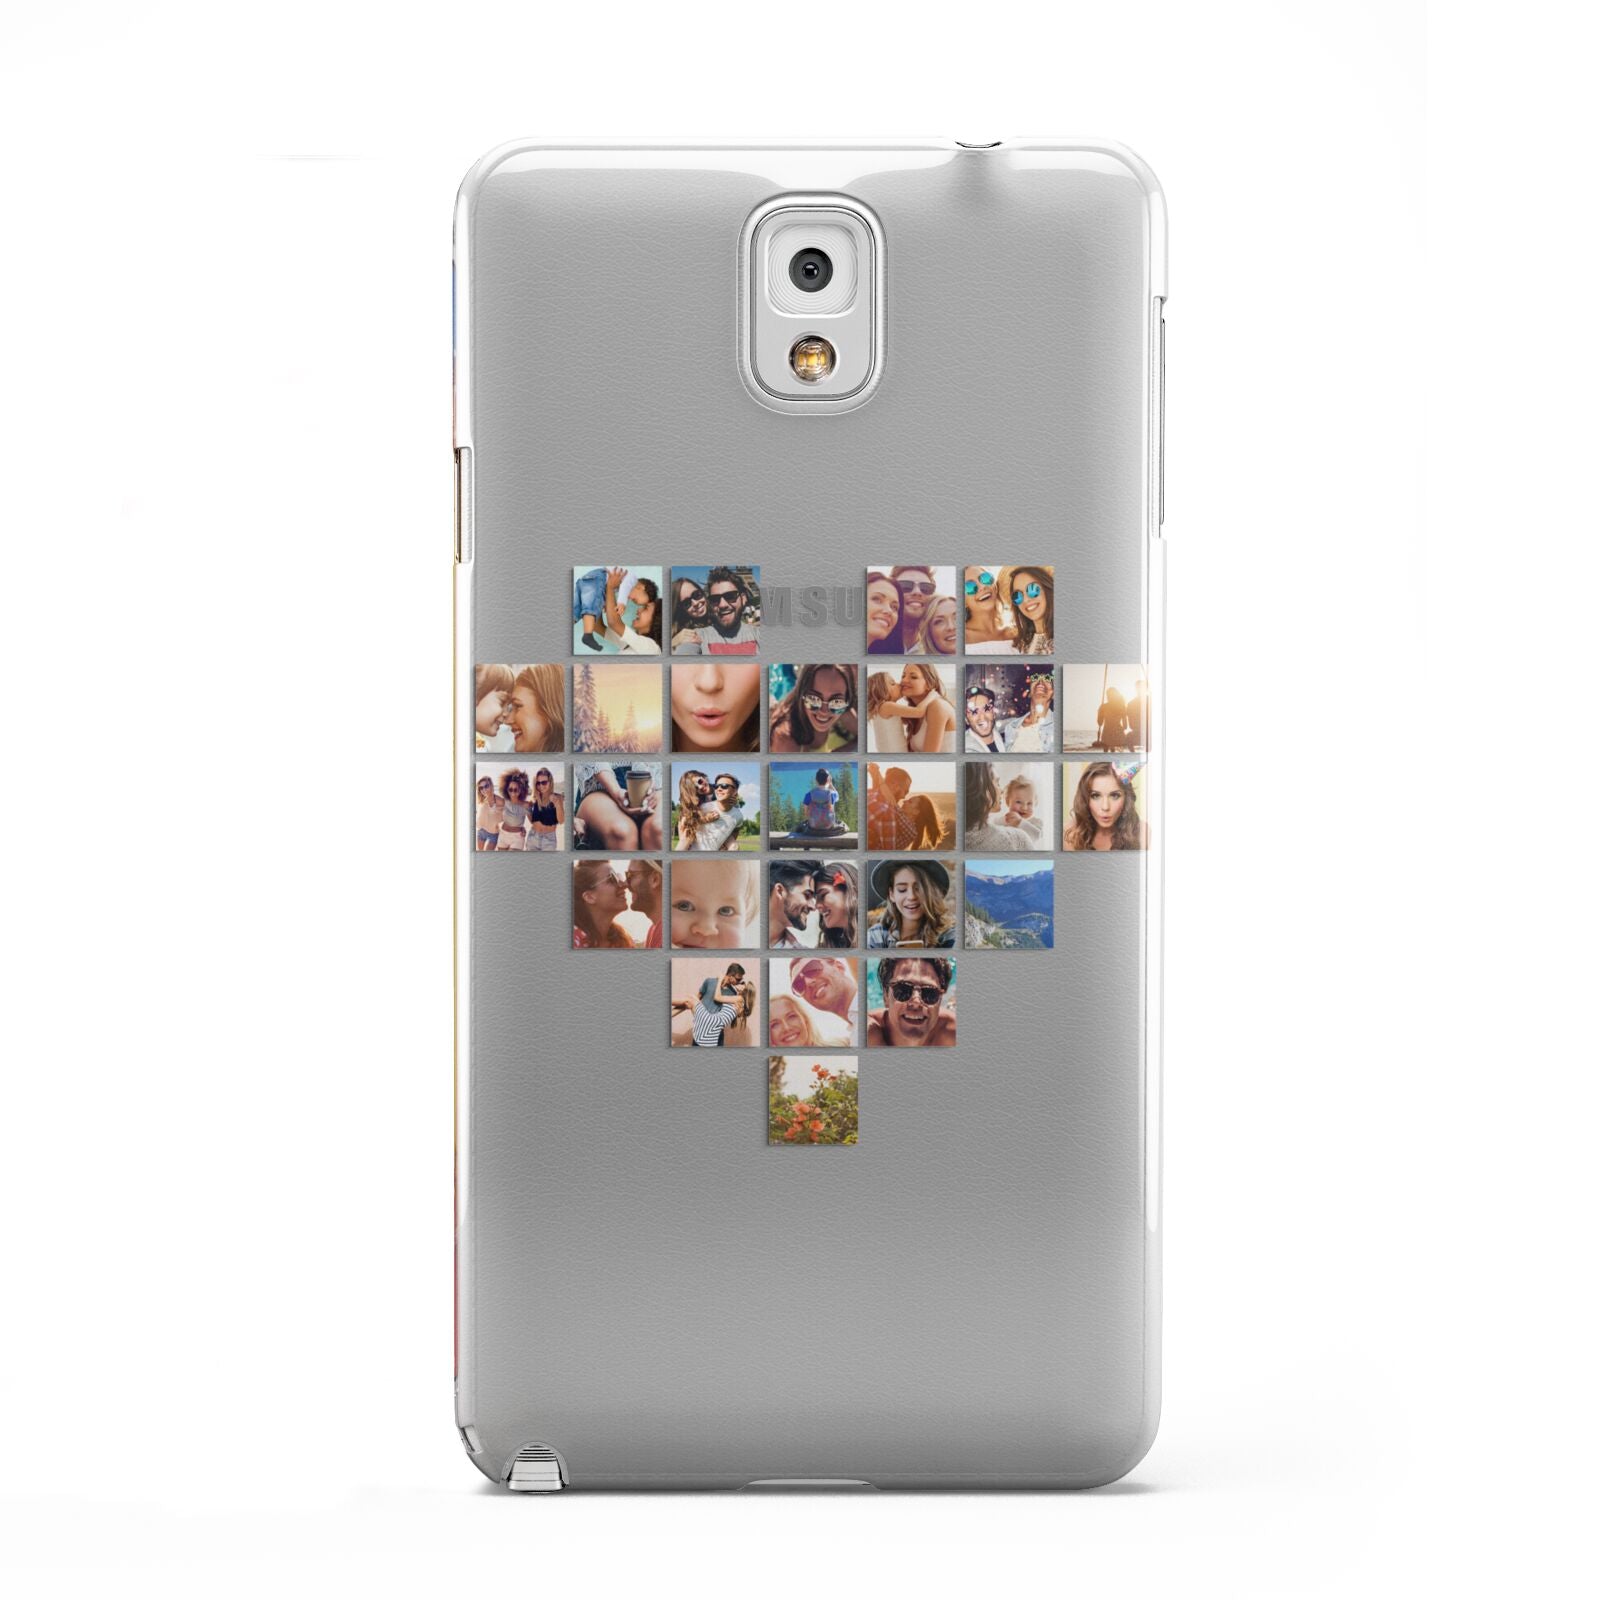 Large Heart Photo Montage Upload Samsung Galaxy Note 3 Case